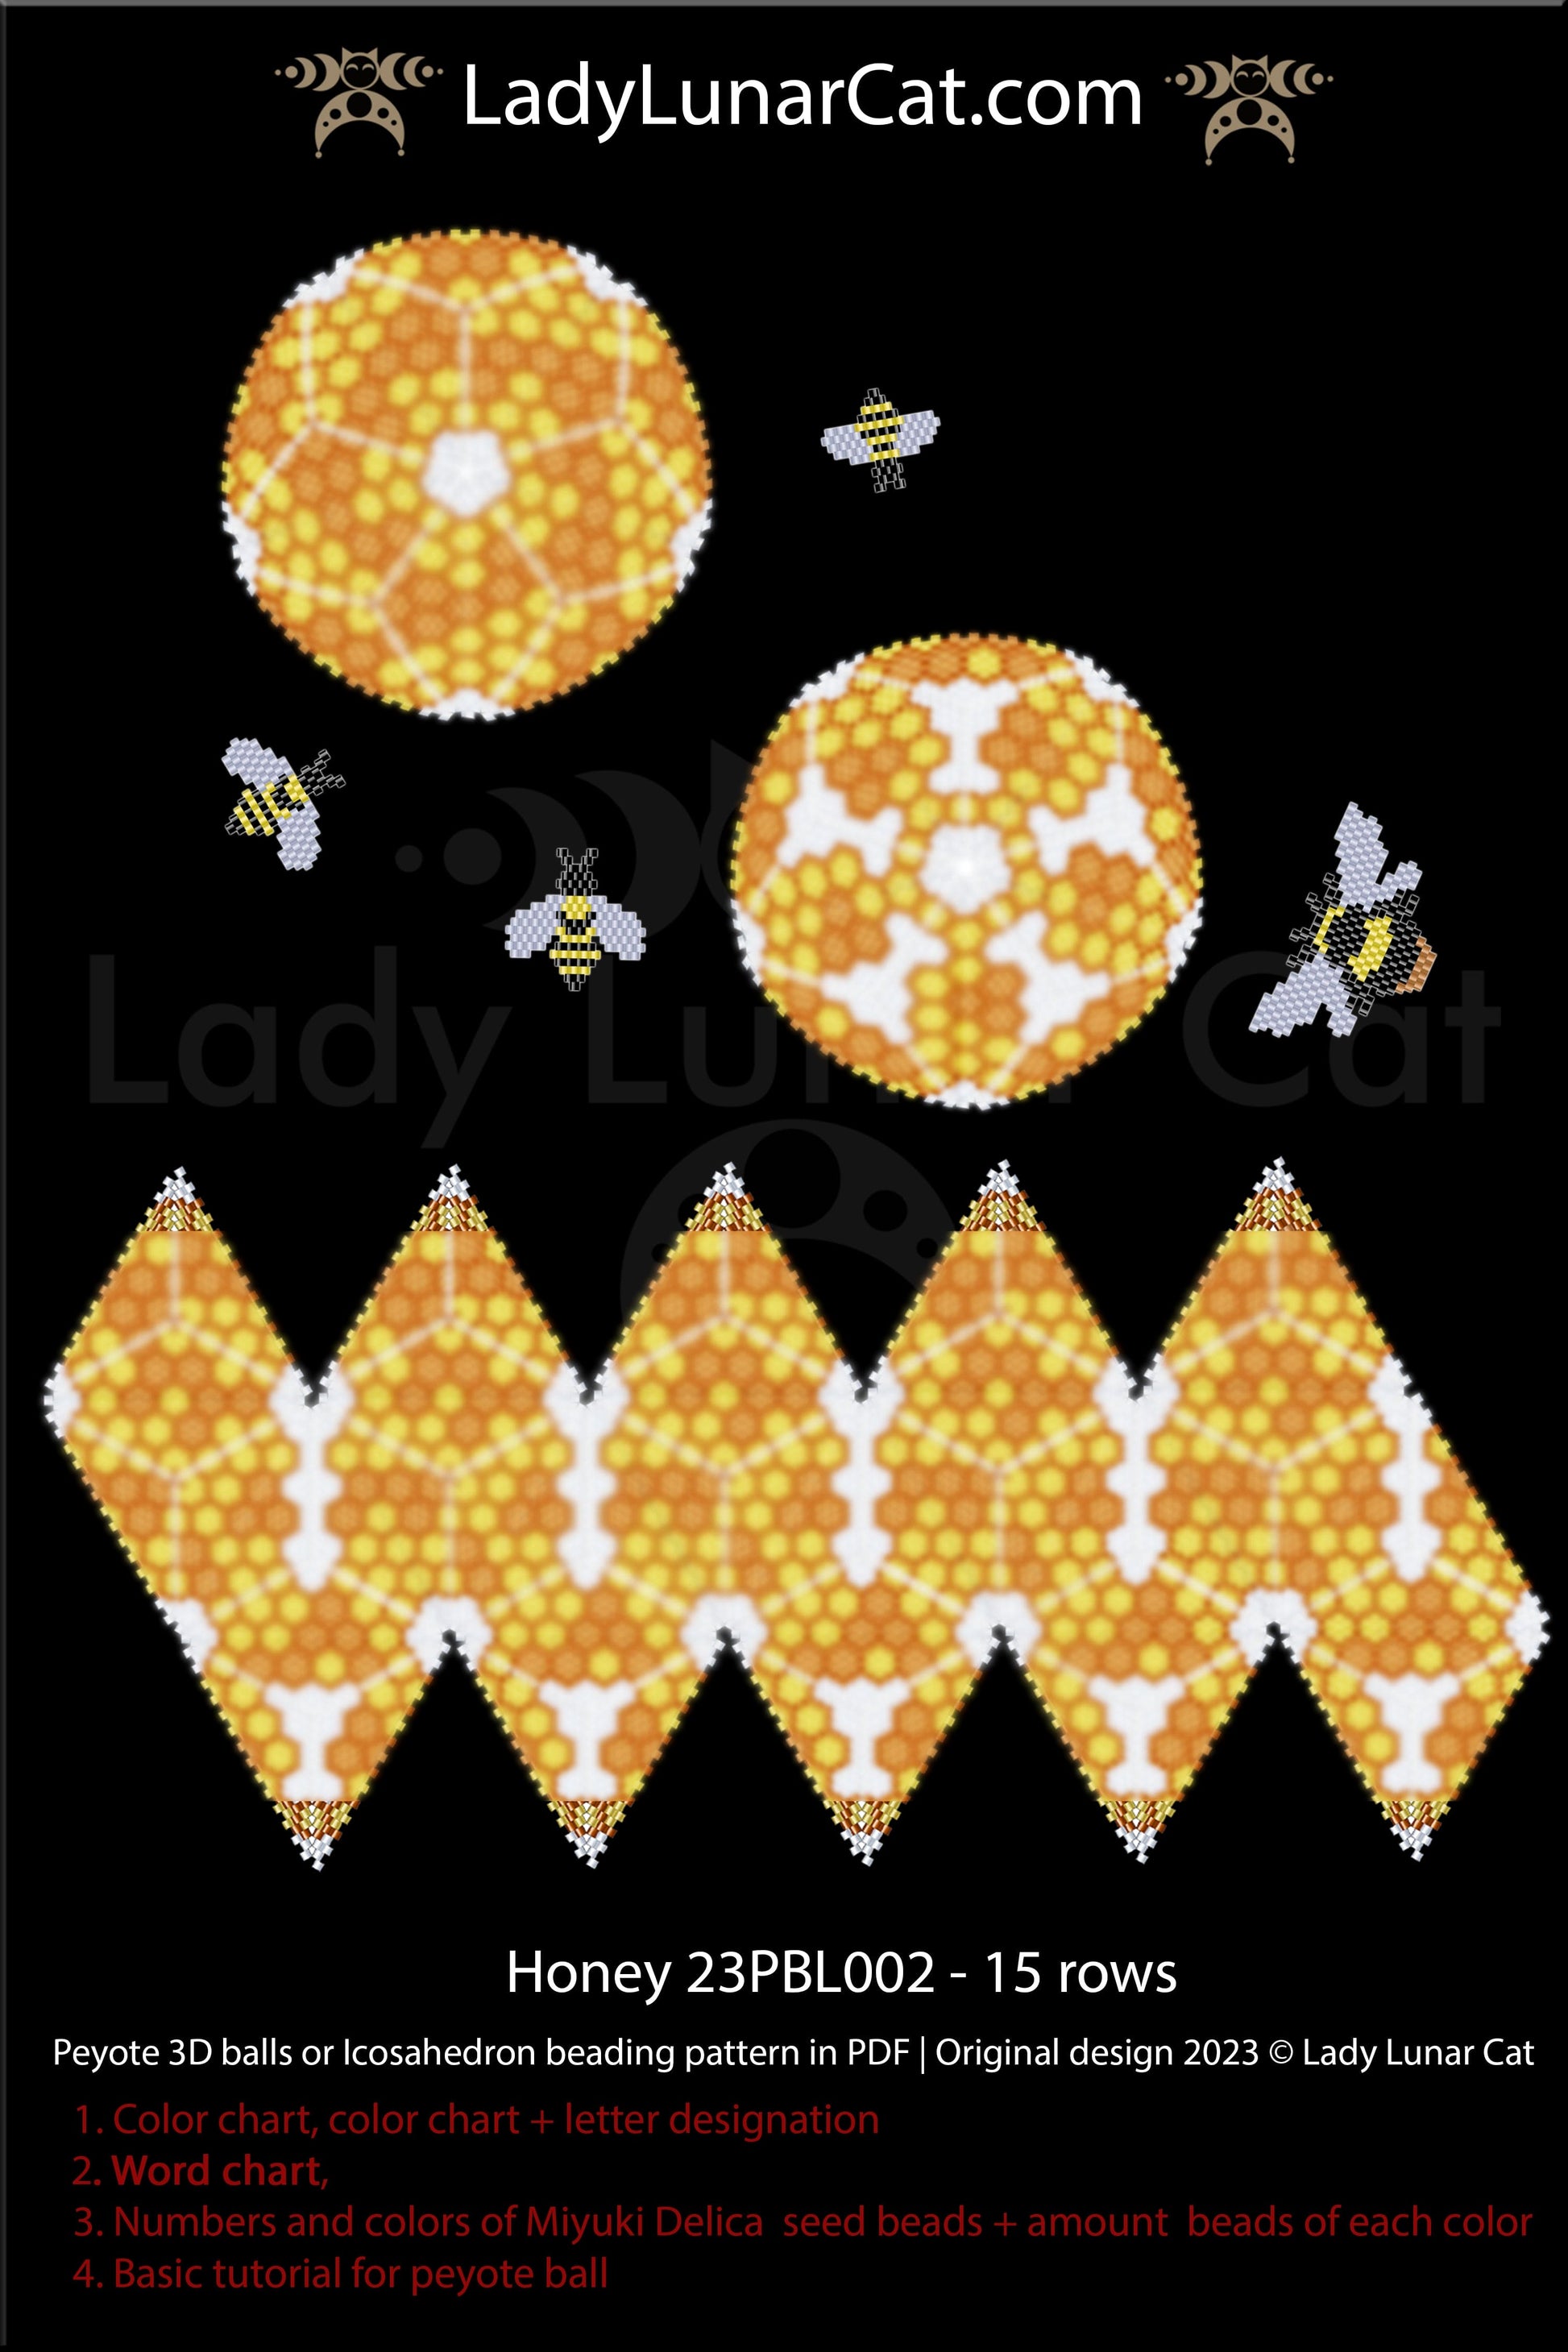 Copy of Peyote 3d ball pattern for beading | Beaded Icosahedron Wild strawberry 23PBL001  11 rows LadyLunarCat